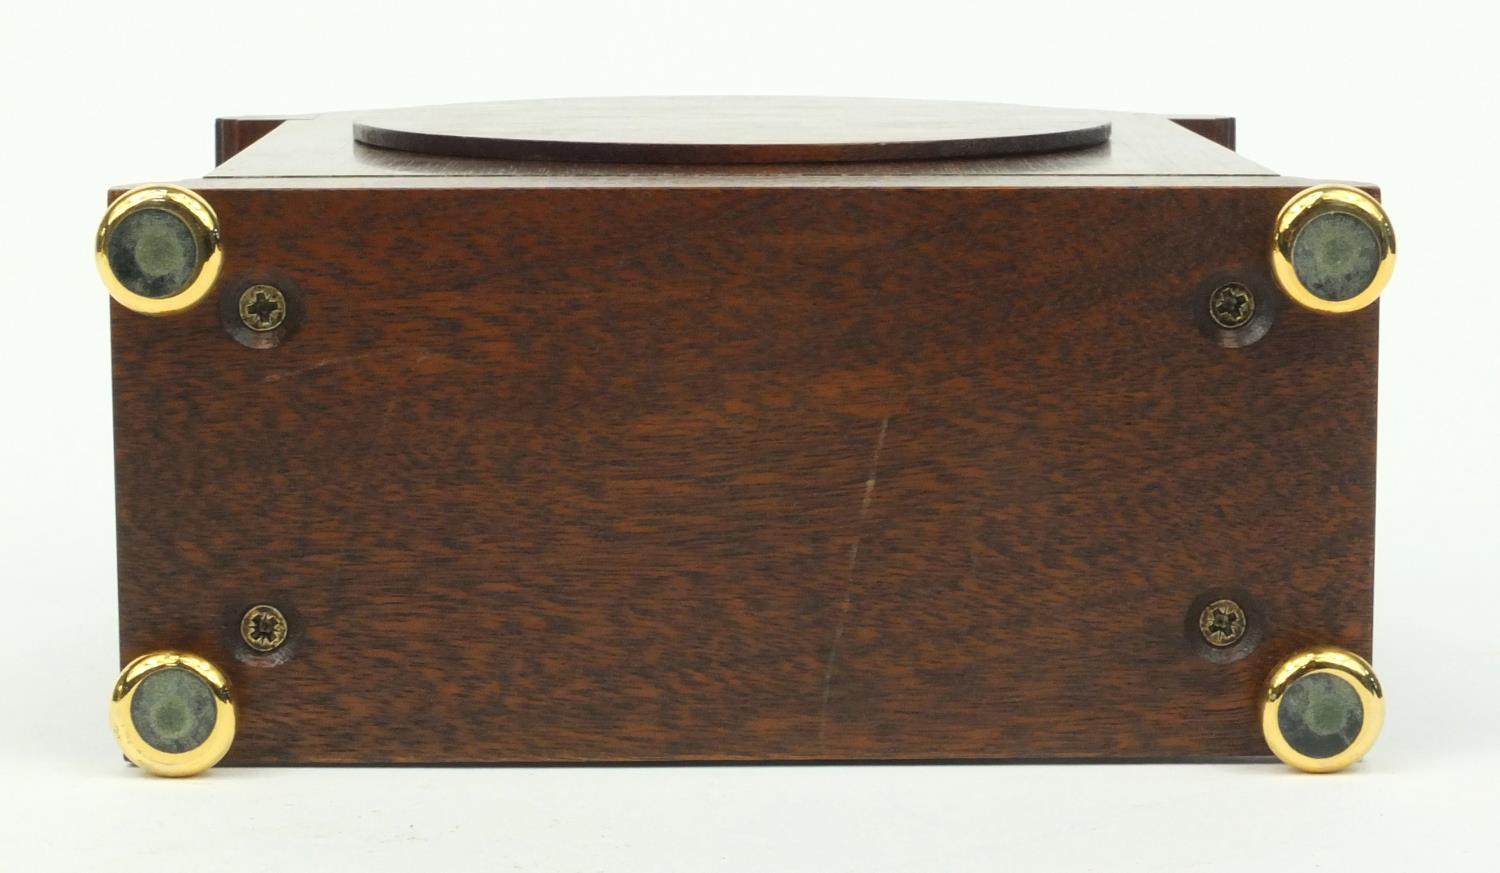 Inlaid mahogany Comitti of London mantel clock, with brass handle, 25cm high including the handle - Image 6 of 7